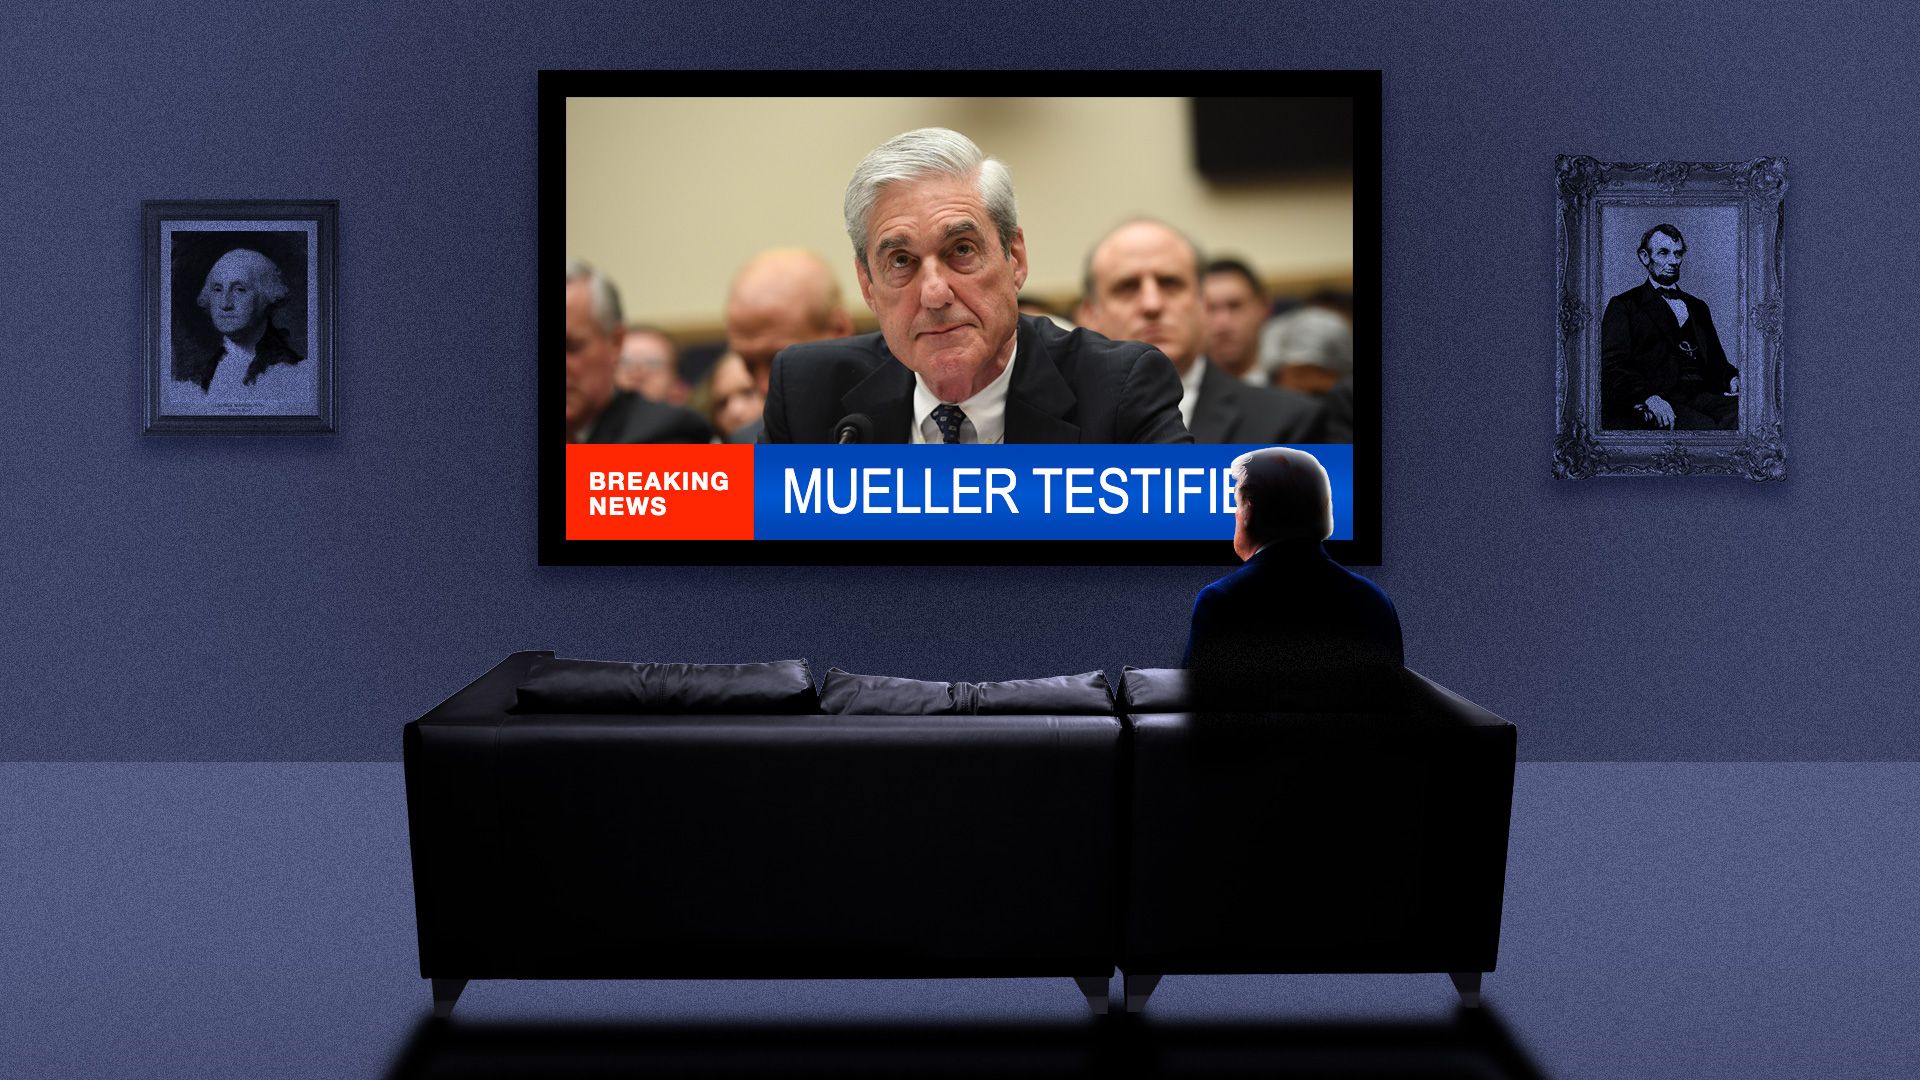 An illustration of Donald Trump watching the Mueller testimony.